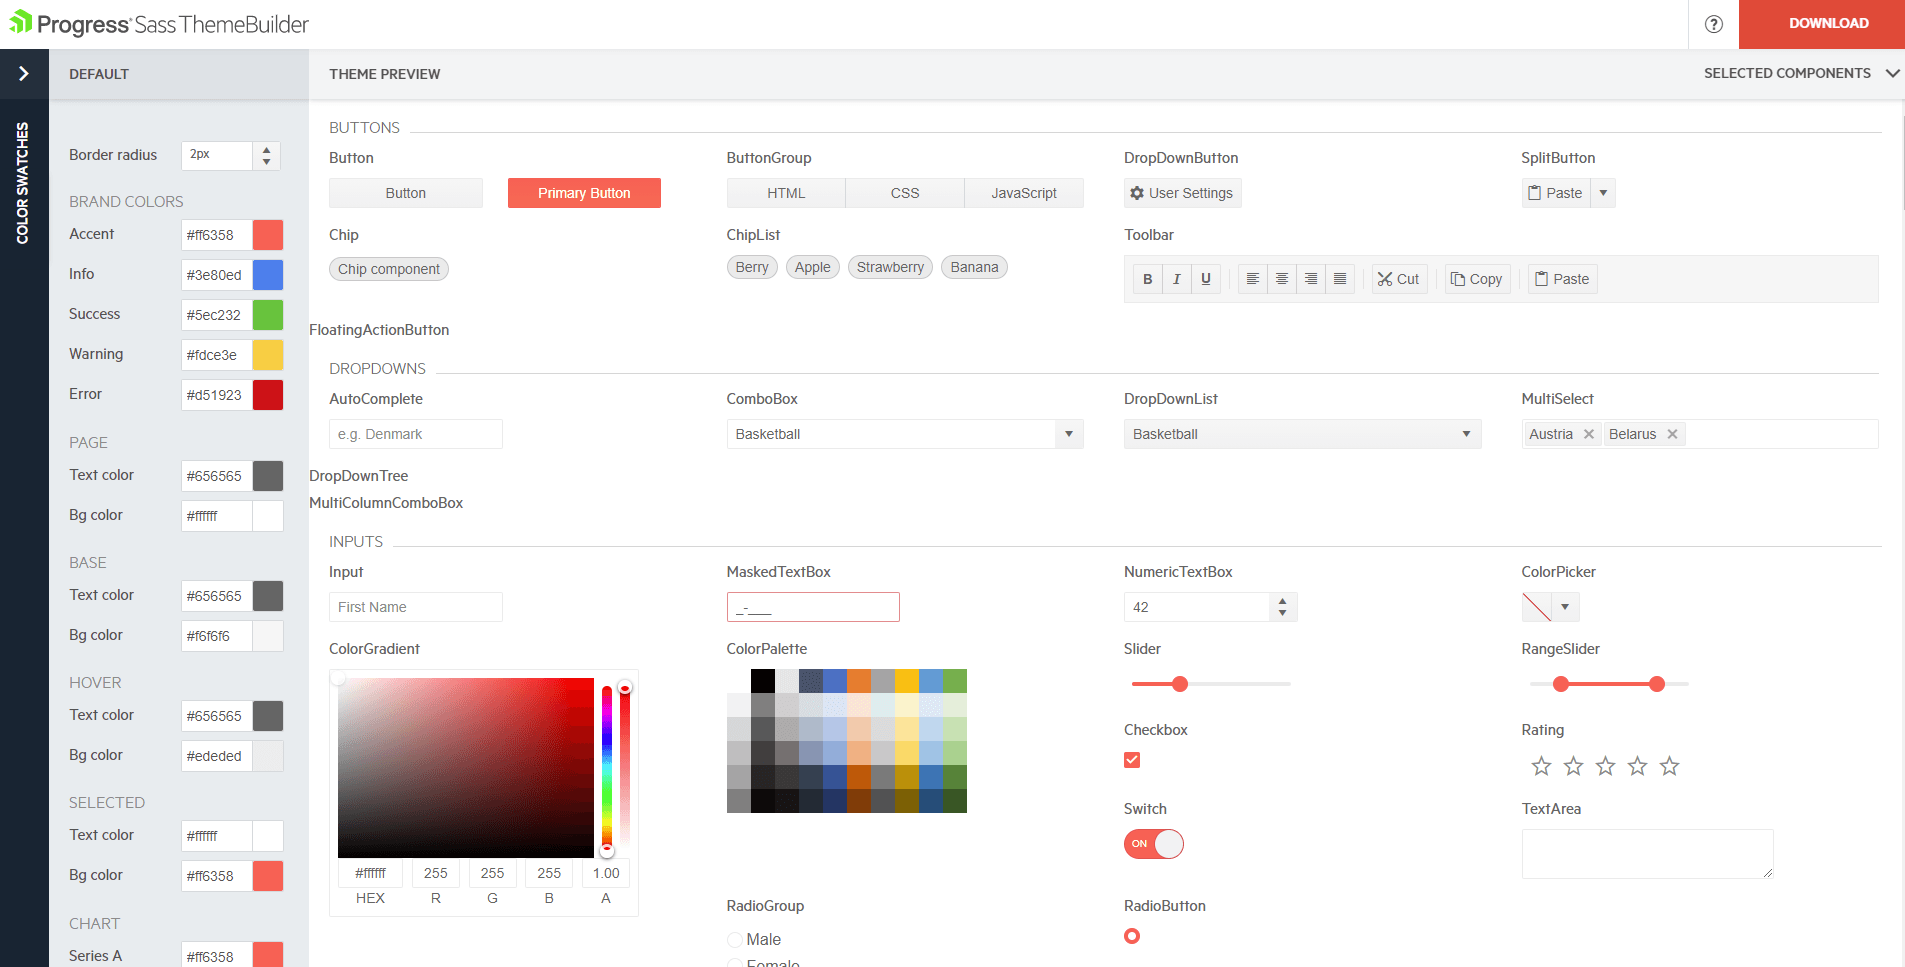 ThemeBuilder UI has a side bar with a list of default brand colors, page colors, base, hover, selected, chart. The theme preview lists various components and shows a preview of them, including buttons, dropdowns, inputs.